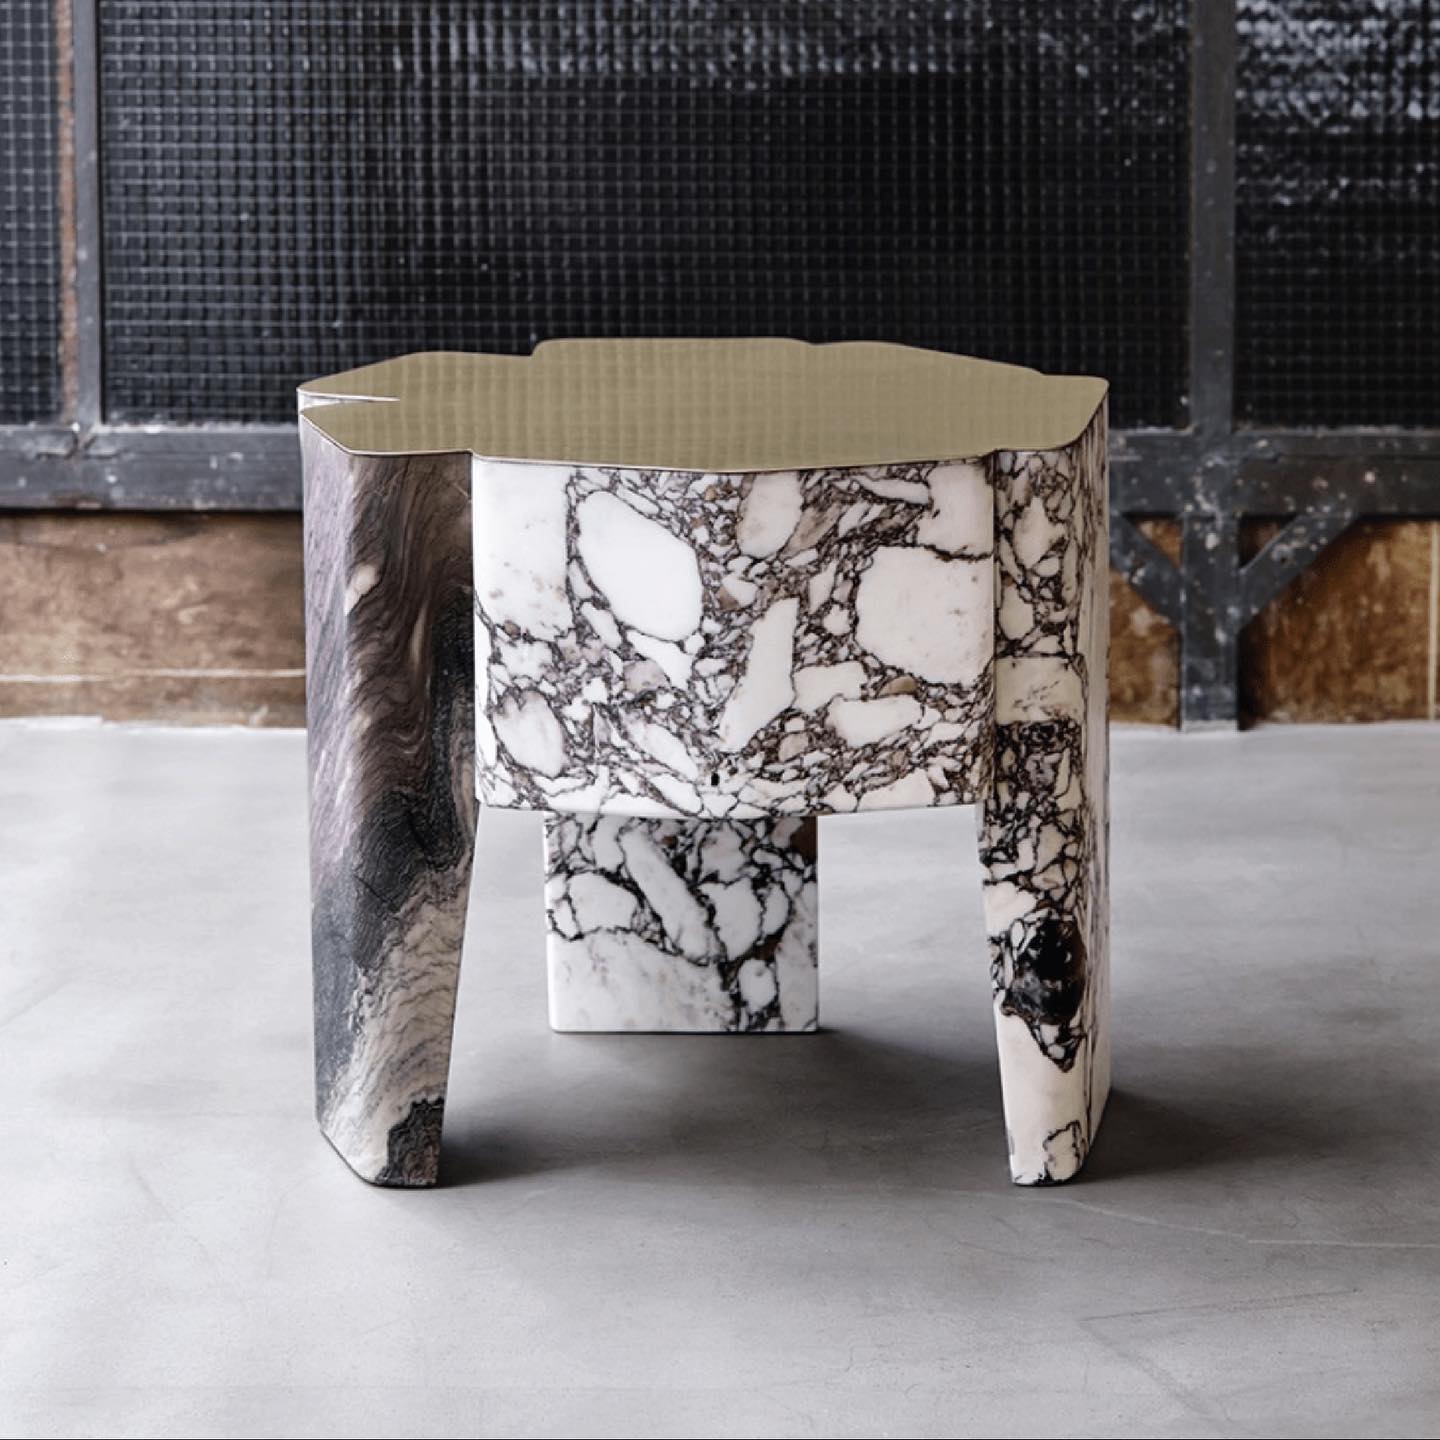 @sprucemagazinevictoria online article, Ivan Meade - Favourite Piece of Furniture

DC1615 STOOL/SIDE TABLE by Vincenzo de Cotiis @vdecotiis 

“My current favorite piece of furniture is the DC1615 STOOL/SIDE TABLE by Vincenzo de Cotiis (Italy) – I am usually attracted to pieces that are sculptural, unique in their design and that you can see an exceptional materiality and craftsmanship on them.  Pieces that are not just functional, but that add that a – je ne sais quoi -element to any space.  This particular piece doesn’t matter the side you see, it has a different visual perspective.  Its monolithic presence; it can stand alone wherever you want to place it; or it can be a complement to any room as a side table or stool.  Because its sculptural quality it’s a great piece to mix with antiques or any type of modern architecture.  The unique mix in the Italian marbles create a really strong contrast that gives a very sophisticated singularity to the piece.  The brass top adds shine playing with an interesting juxtaposition with all the materiality used on it.  I think it is a very sensual piece!” 
– Ivan Meade of Meade Design Group
.
.
.
#vincenzodecotiss #sprucemagazine #onlinearticle #favouritefurniture #feature #uniquedesign #craftsmanship #sculptural #architecture #sophisticated #ivanmeade #meadedesigngroup #mdg #interiordesign #victoriabc #yyj #yyjinteriors